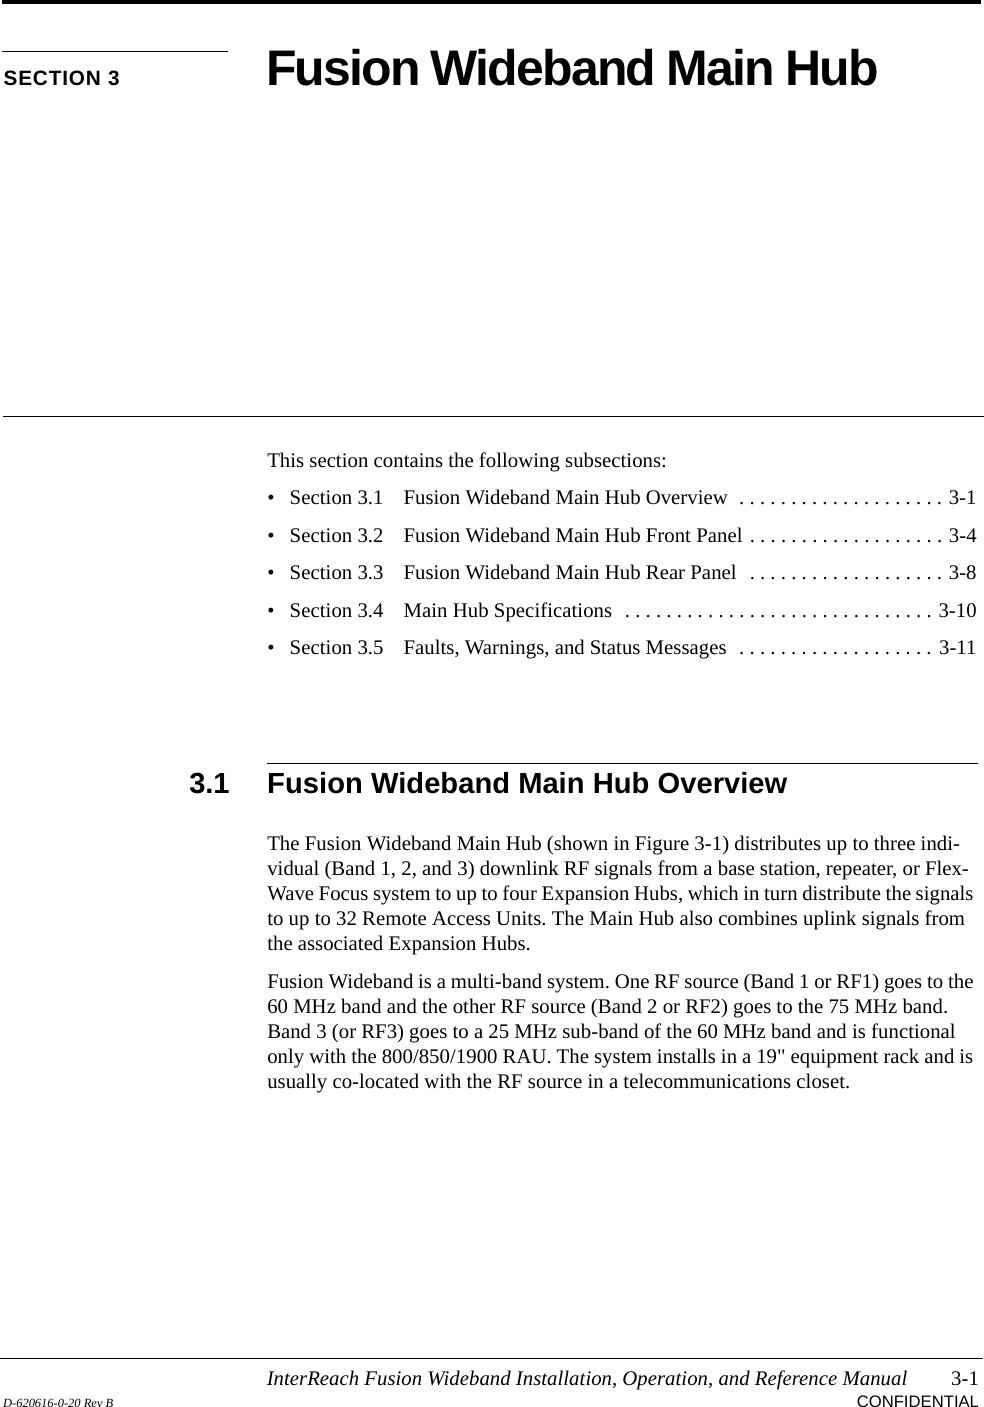 InterReach Fusion Wideband Installation, Operation, and Reference Manual 3-1D-620616-0-20 Rev B CONFIDENTIALSECTION 3 Fusion Wideband Main HubThis section contains the following subsections:• Section 3.1   Fusion Wideband Main Hub Overview  . . . . . . . . . . . . . . . . . . . . 3-1• Section 3.2   Fusion Wideband Main Hub Front Panel . . . . . . . . . . . . . . . . . . . 3-4• Section 3.3   Fusion Wideband Main Hub Rear Panel  . . . . . . . . . . . . . . . . . . . 3-8• Section 3.4   Main Hub Specifications  . . . . . . . . . . . . . . . . . . . . . . . . . . . . . . 3-10• Section 3.5   Faults, Warnings, and Status Messages  . . . . . . . . . . . . . . . . . . . 3-113.1 Fusion Wideband Main Hub OverviewThe Fusion Wideband Main Hub (shown in Figure 3-1) distributes up to three indi-vidual (Band 1, 2, and 3) downlink RF signals from a base station, repeater, or Flex-Wave Focus system to up to four Expansion Hubs, which in turn distribute the signals to up to 32 Remote Access Units. The Main Hub also combines uplink signals from the associated Expansion Hubs.Fusion Wideband is a multi-band system. One RF source (Band 1 or RF1) goes to the 60 MHz band and the other RF source (Band 2 or RF2) goes to the 75 MHz band. Band 3 (or RF3) goes to a 25 MHz sub-band of the 60 MHz band and is functional only with the 800/850/1900 RAU. The system installs in a 19&quot; equipment rack and is usually co-located with the RF source in a telecommunications closet.